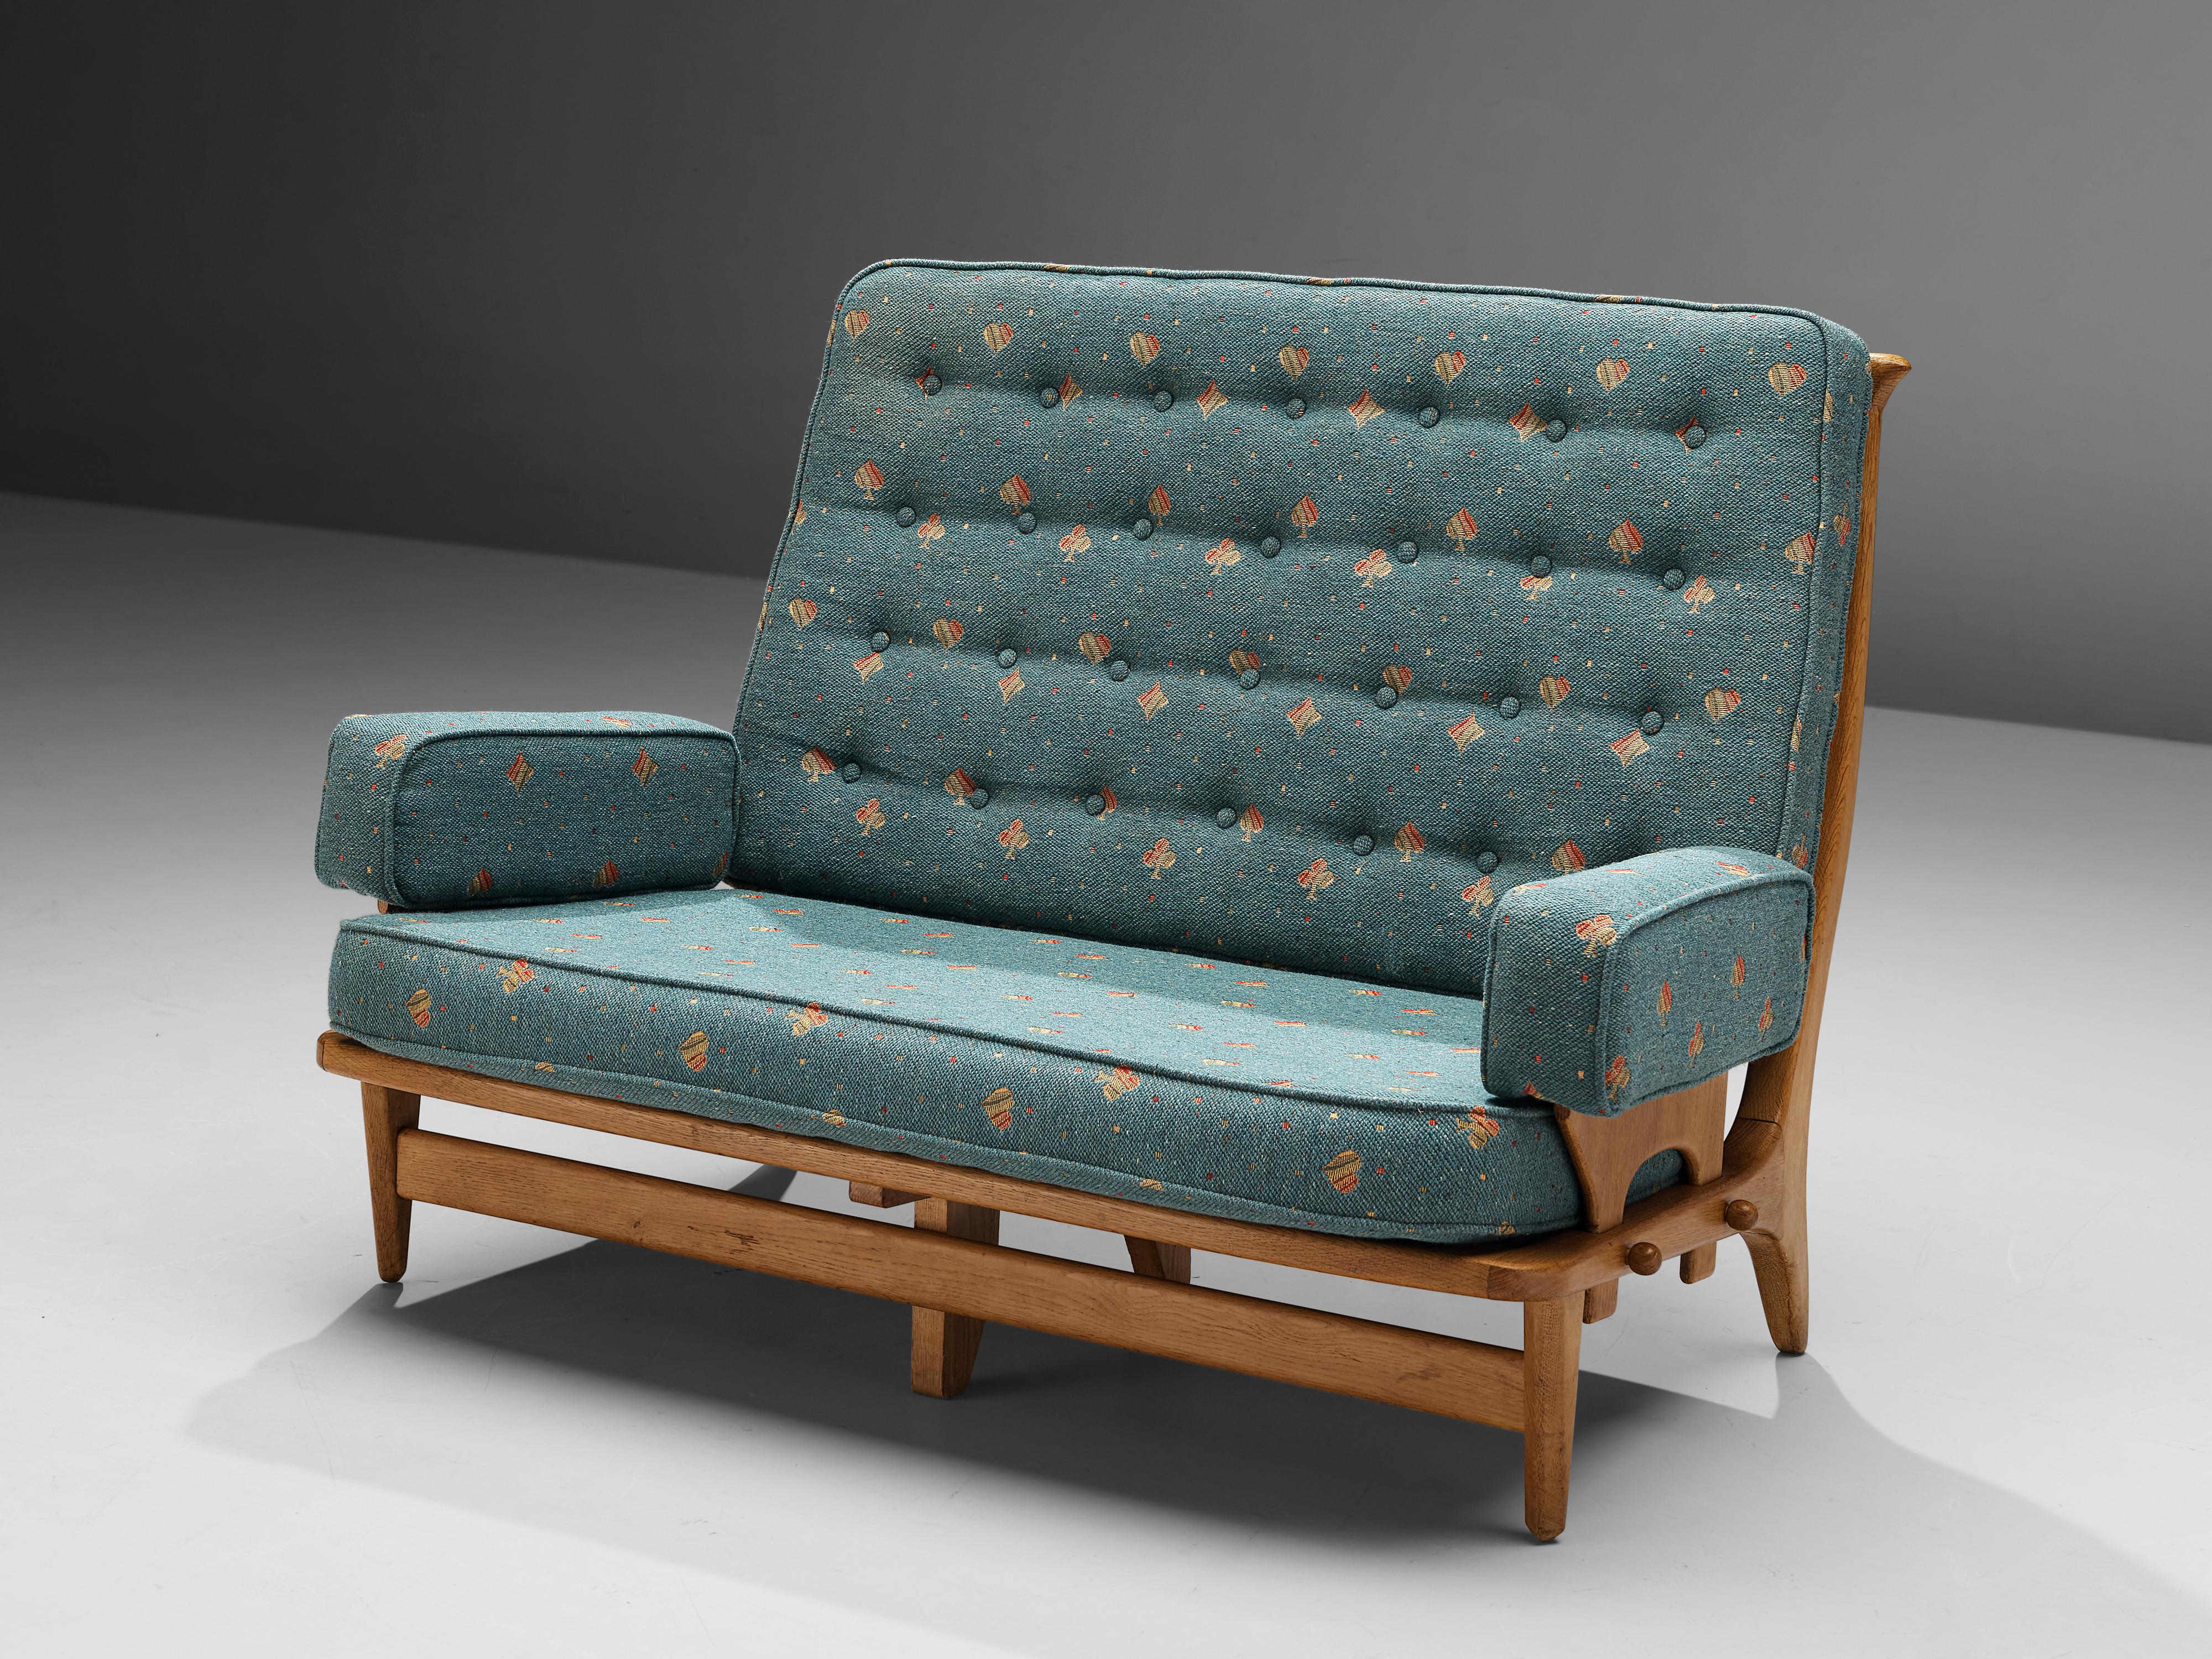 Guillerme & Chambron, sofa, oak, fabric, France, 1960s

Beautiful two-seat settee by Guillerme & Chambron, in solid oak. The back of the seat has been beautifully finished with wooden slats which adds an original and interesting character to the